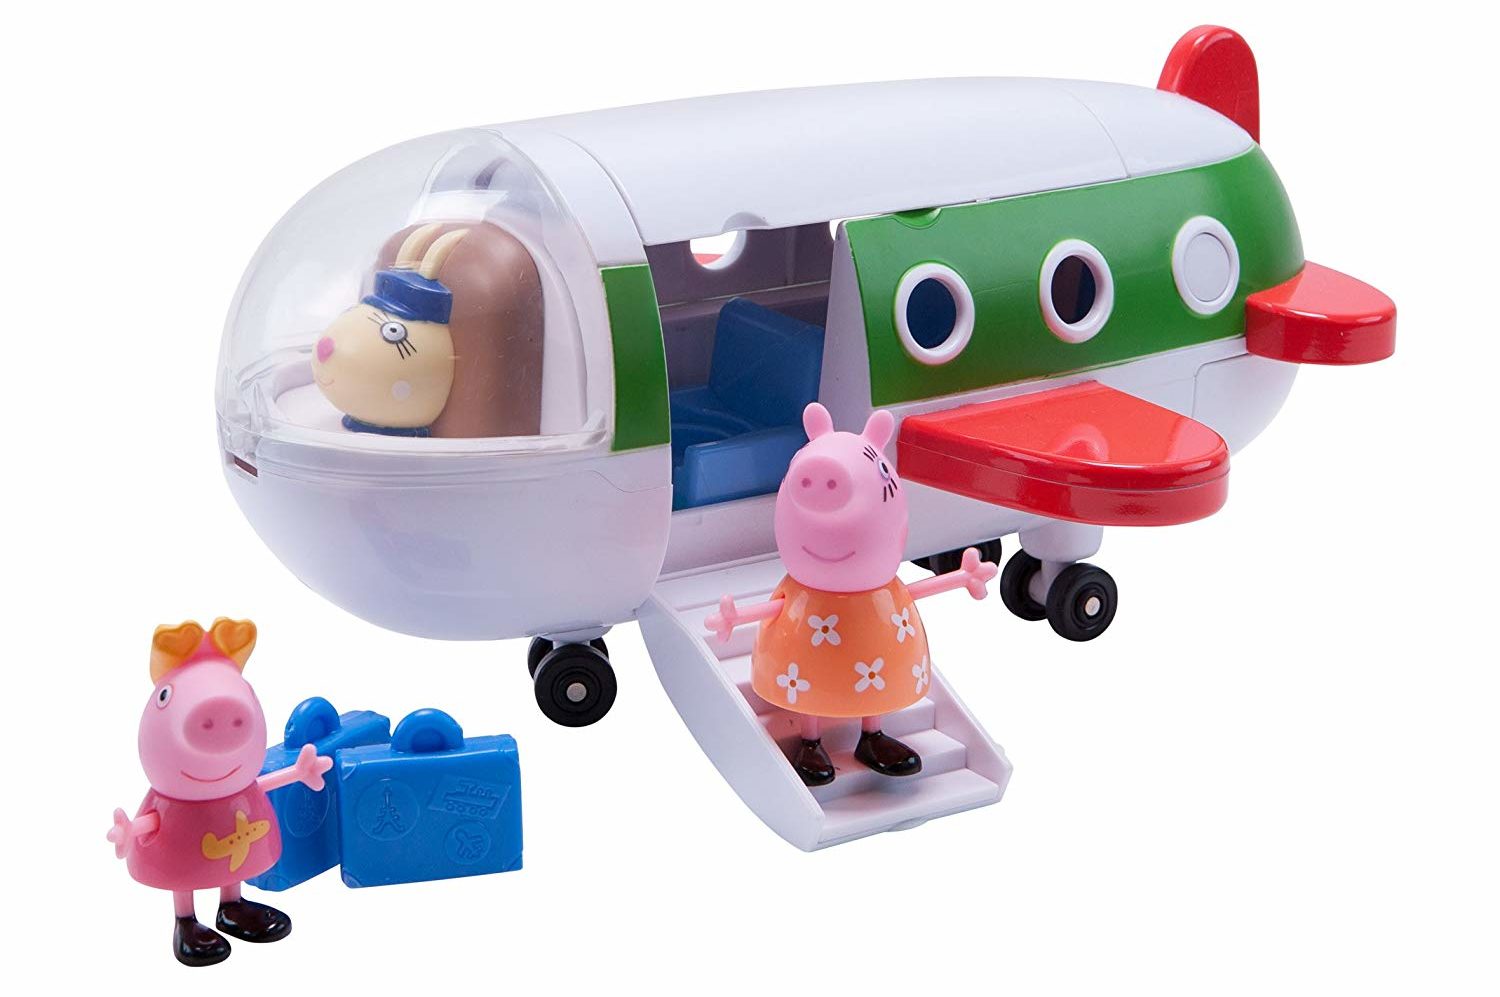 Best Peppa Pig Toys 2022: Holiday Plane Toy 2022